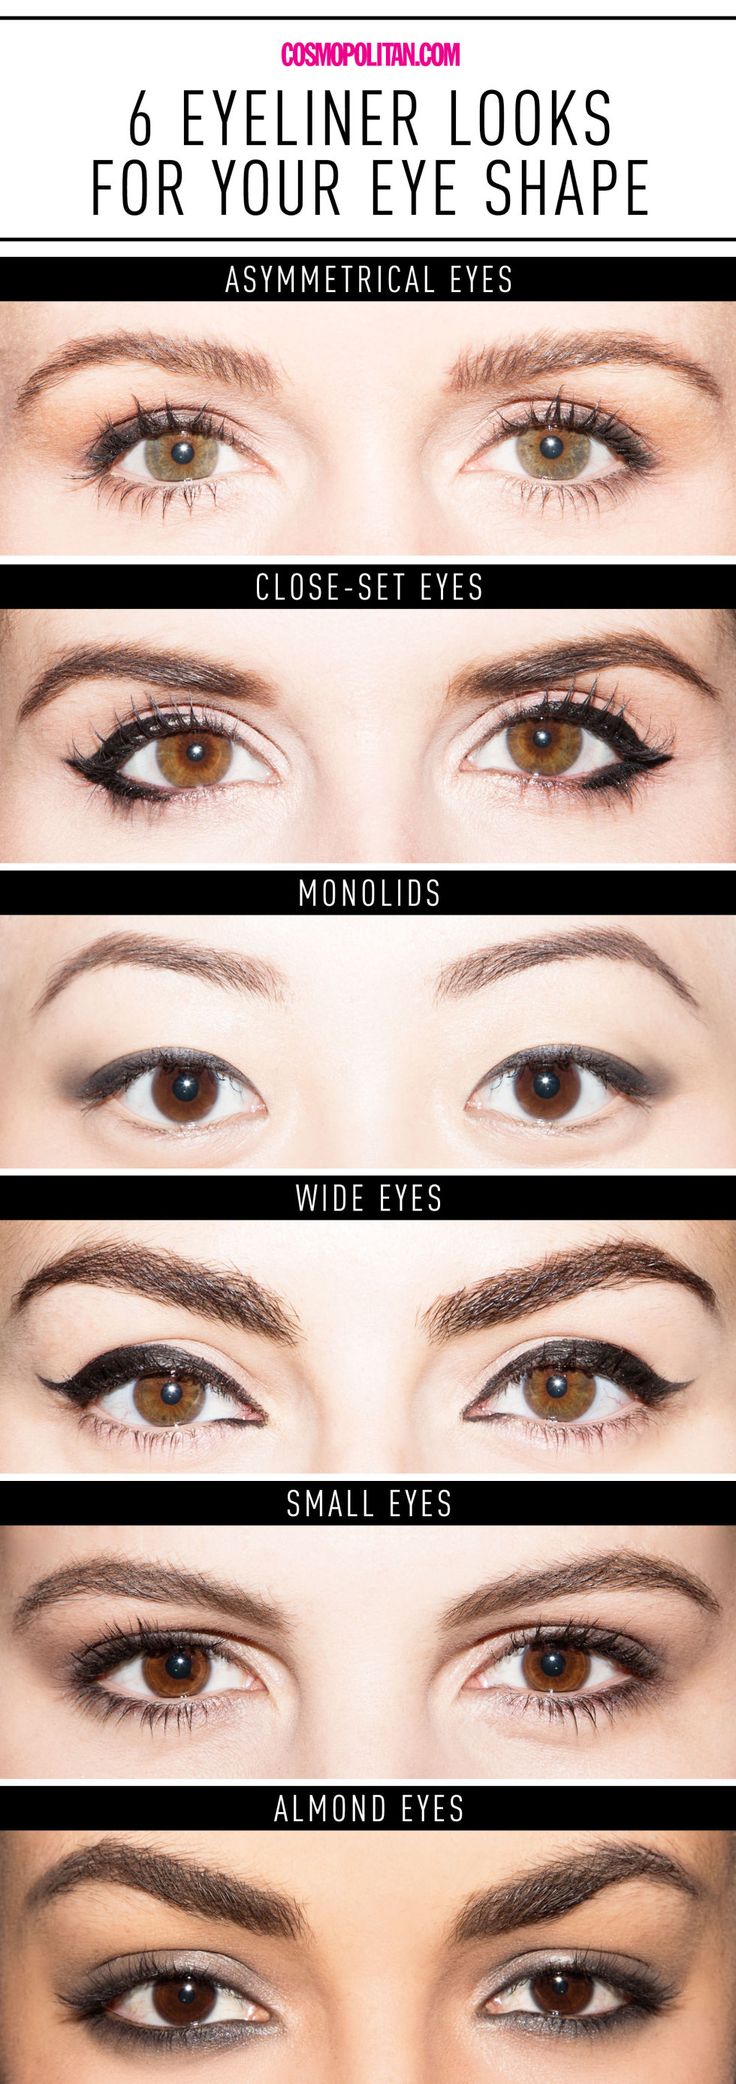 Eyeliner for Eye Shapes Chart - Get the Perfect Eyeliner for Your Eye Shape in 1...